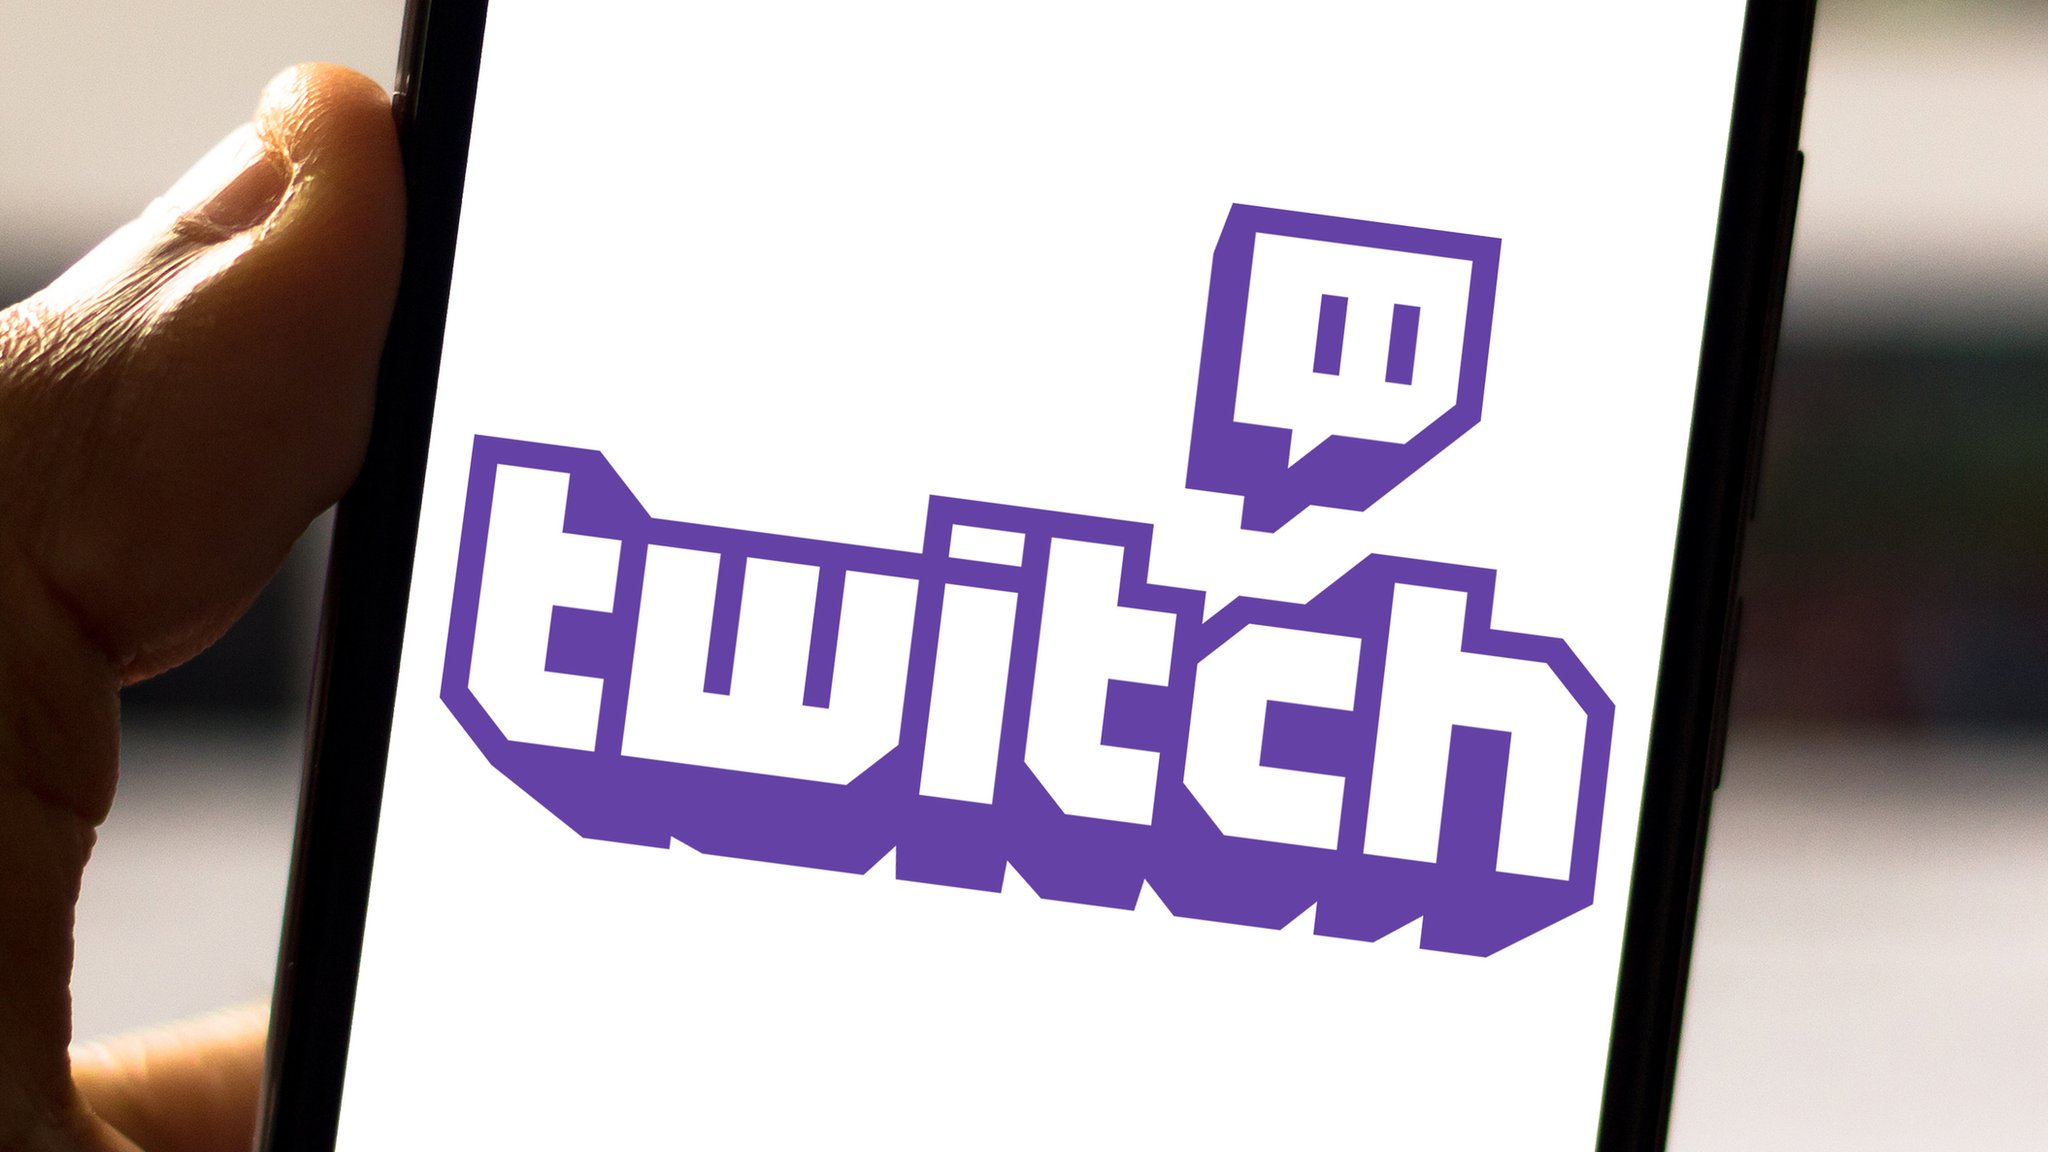 Germany shooting 2,200 people watched on Twitch